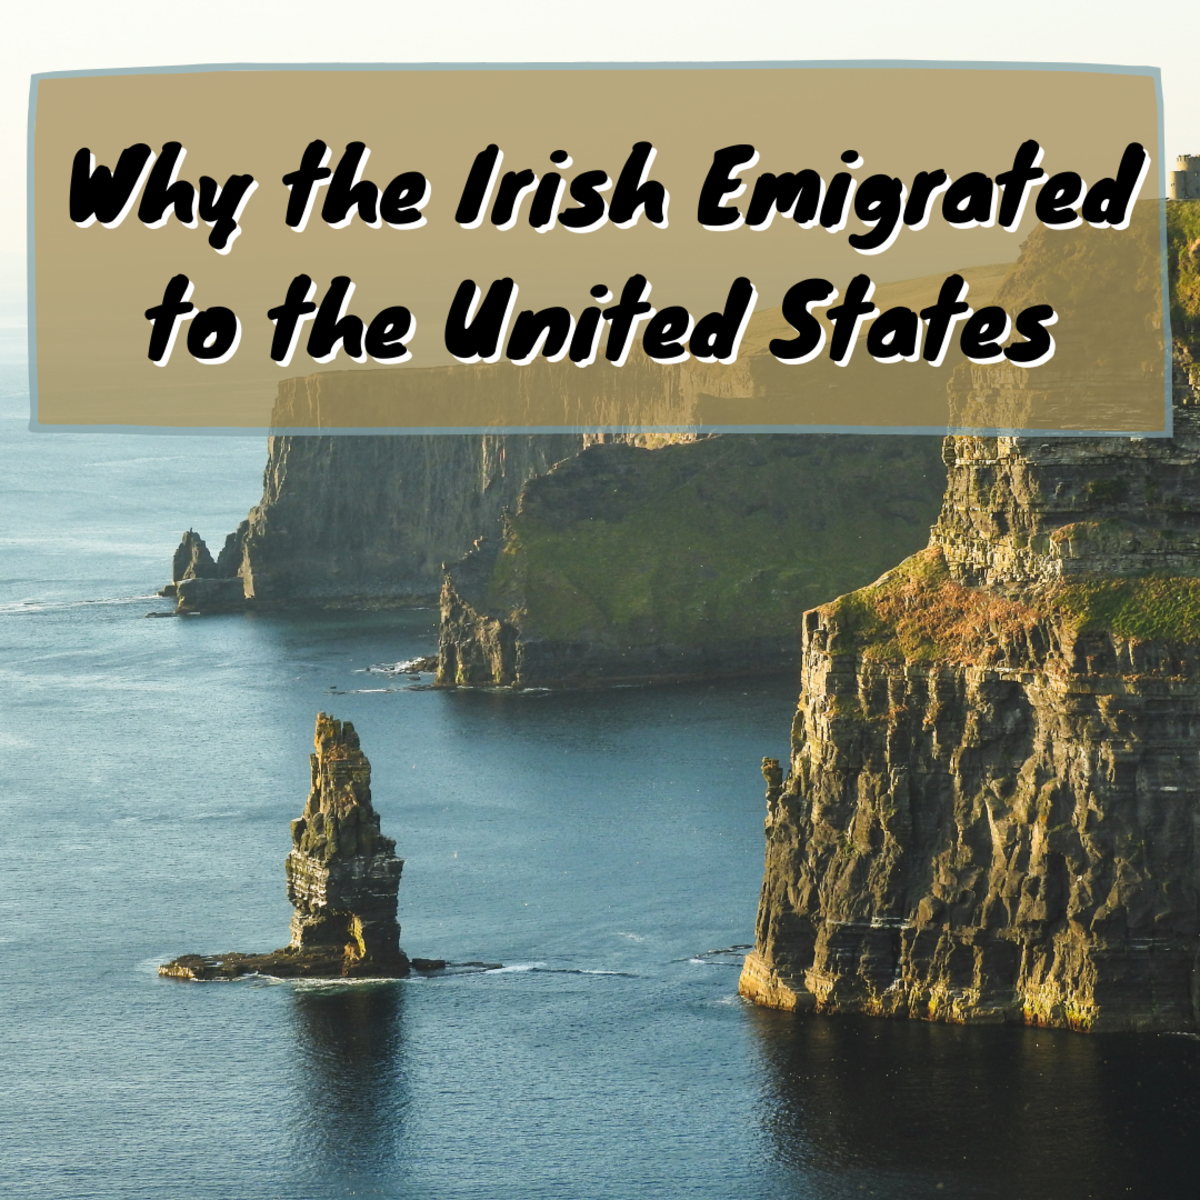 What caused the two great Irish migrations to the United States in the 18th and 19th centuries?